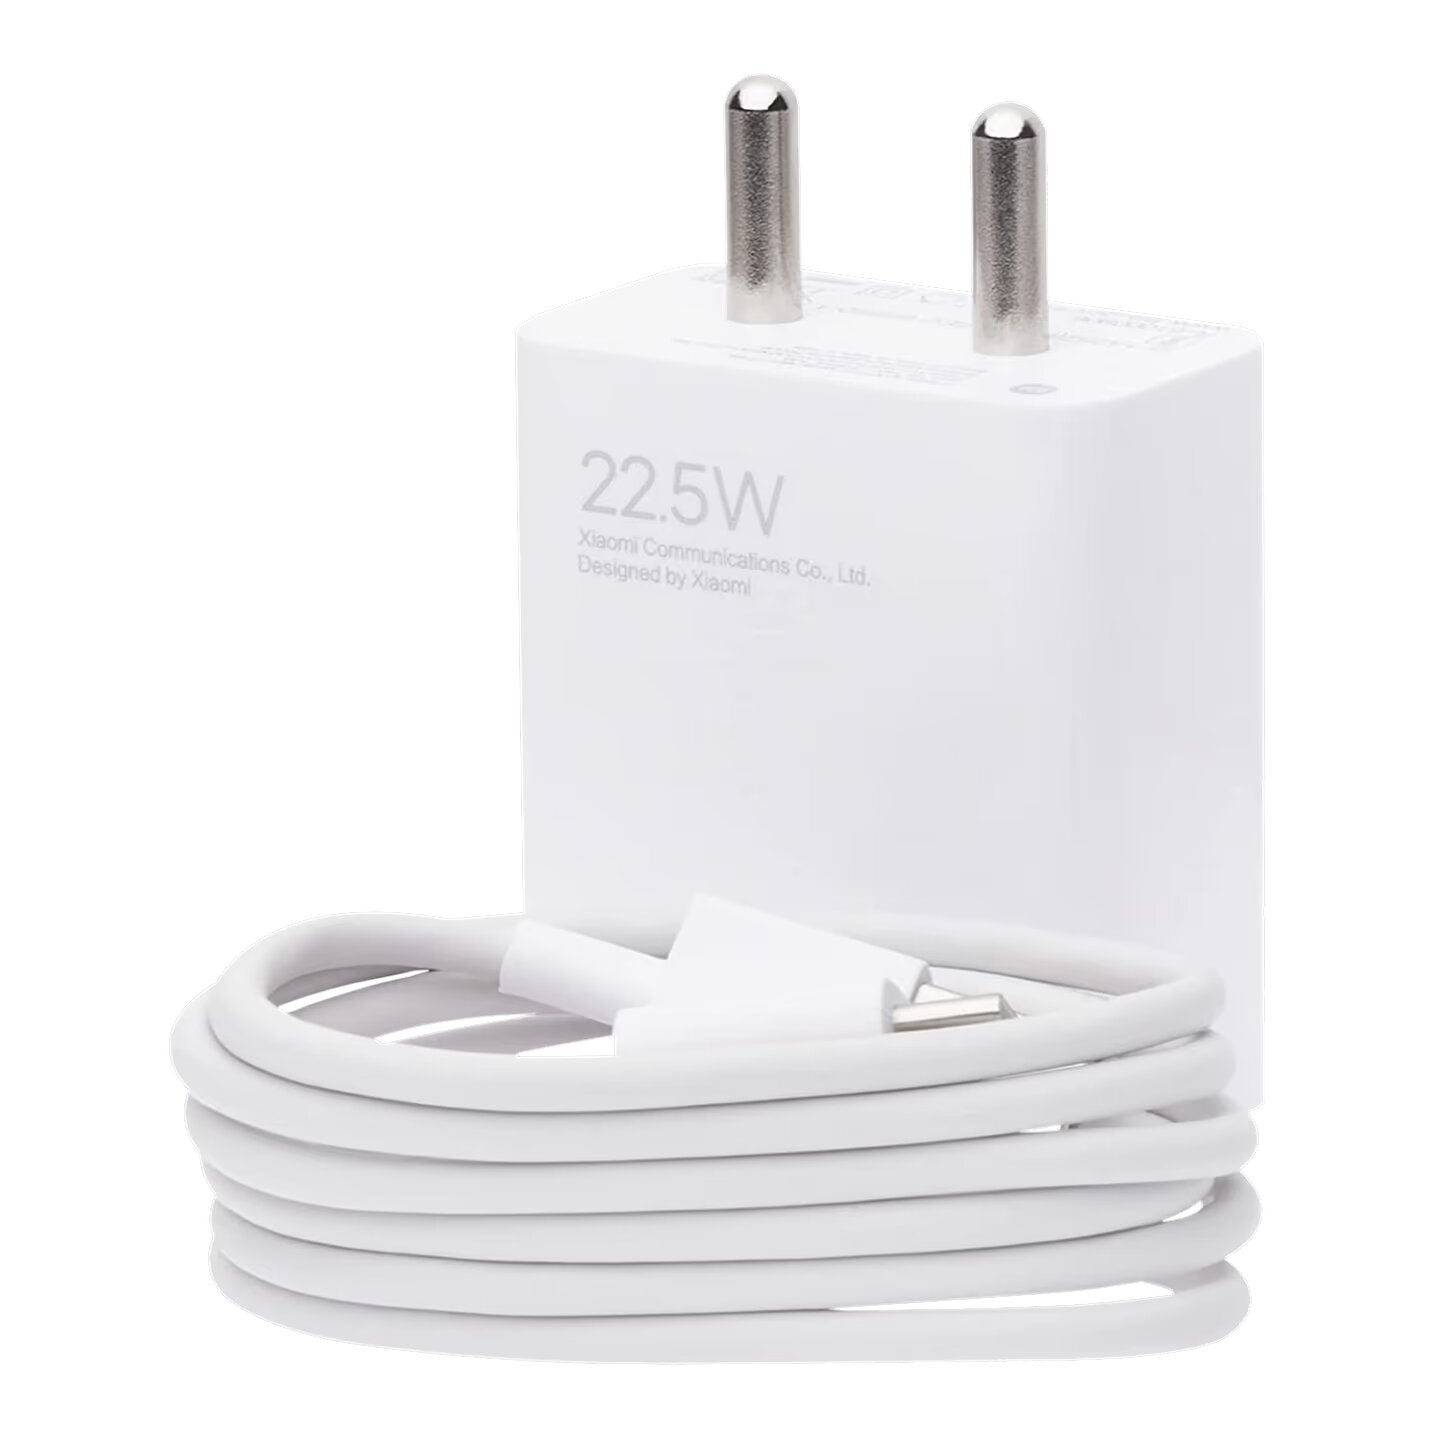 Poco M6 Pro 5G Superfast 22.5W Support Fast Charge 3.0 Charger With Type-C Cable White